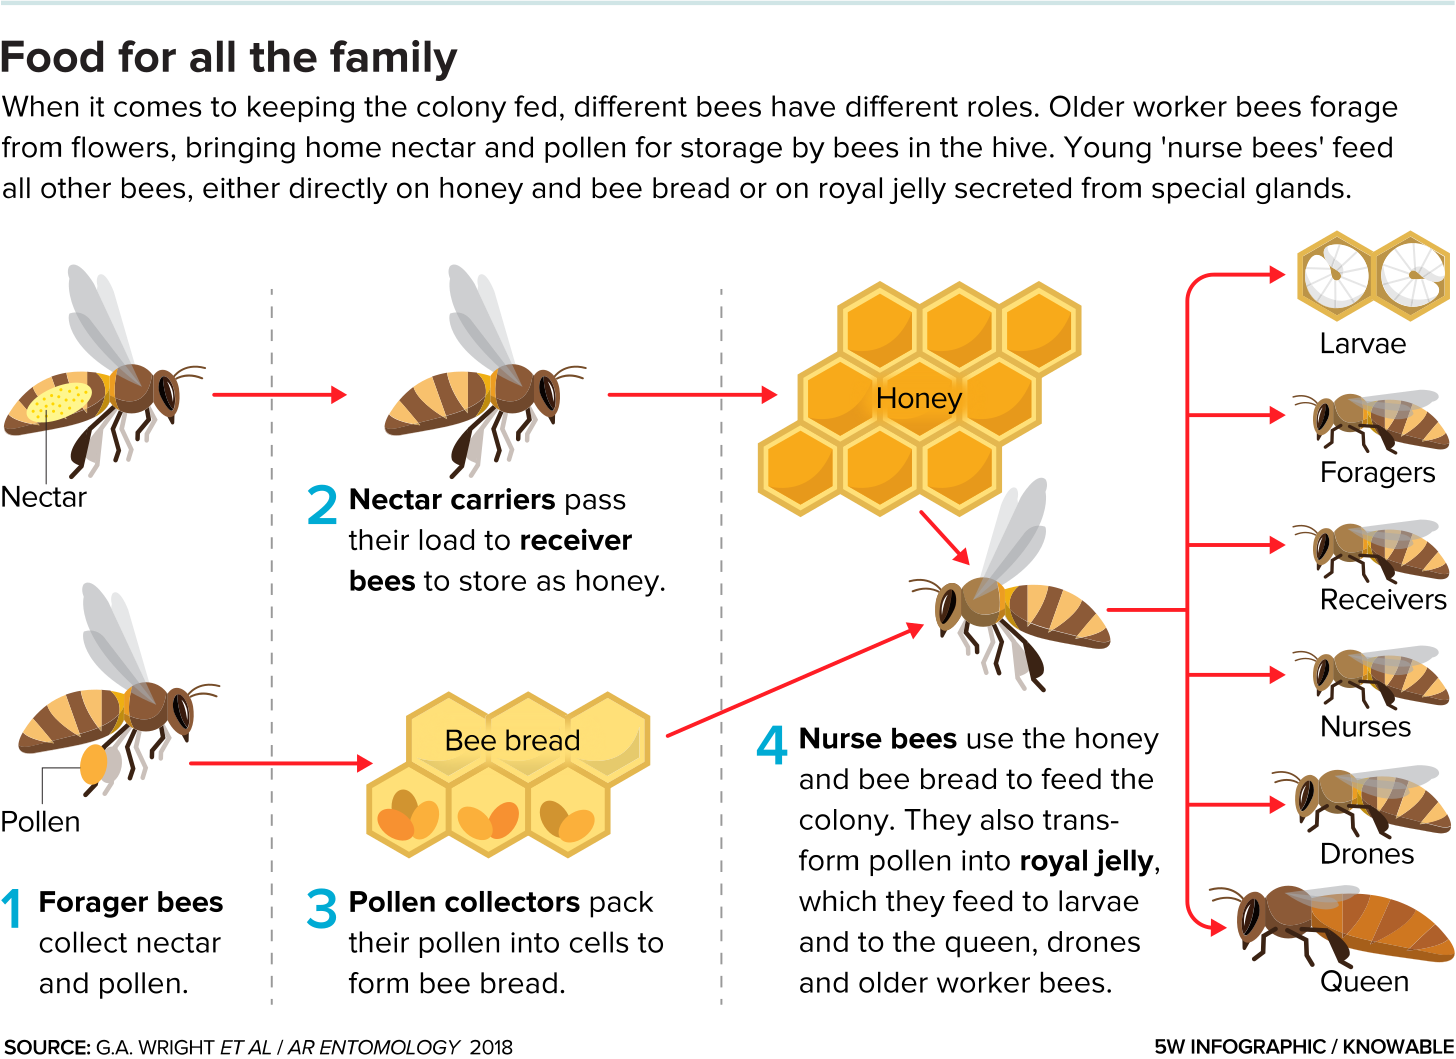 A diagram shows the different roles played by bees in a hive. Forager bees, pollen collectors and nectar carriers work to harvest and store honey, while nurse bees feed the colony. 